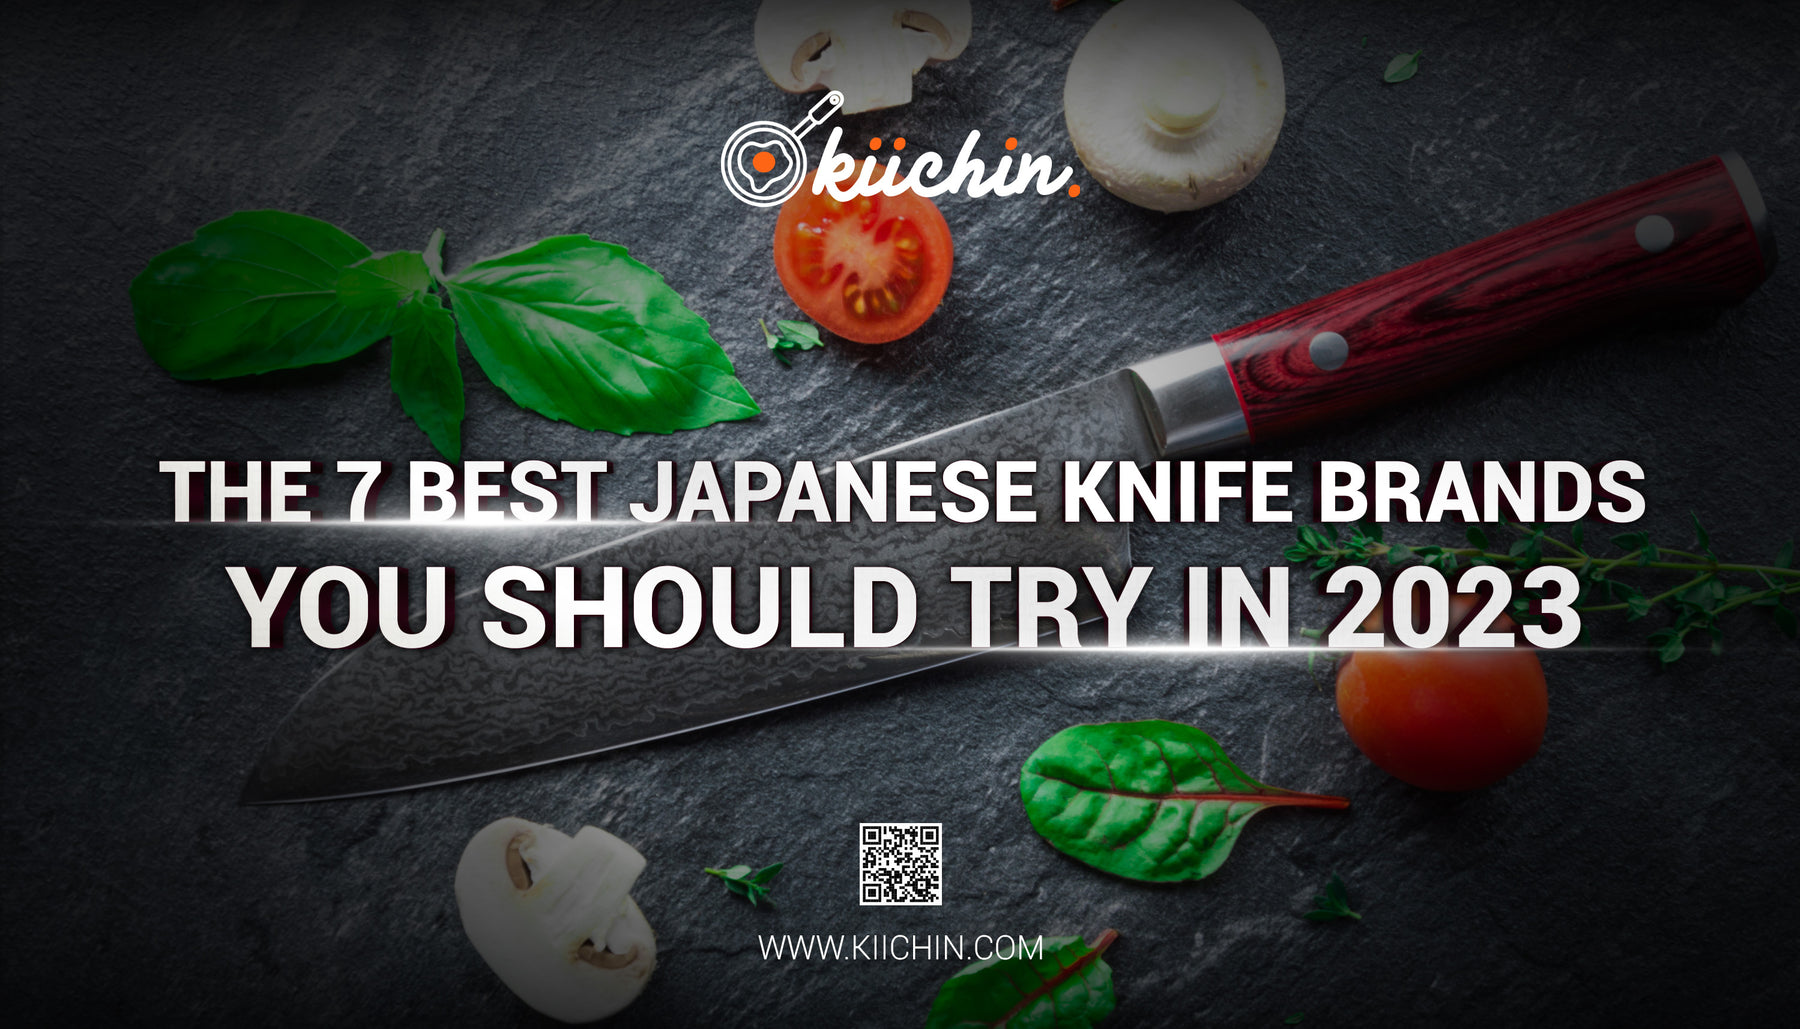 The 7 Best Japanese Knife Brands you should try in 2023